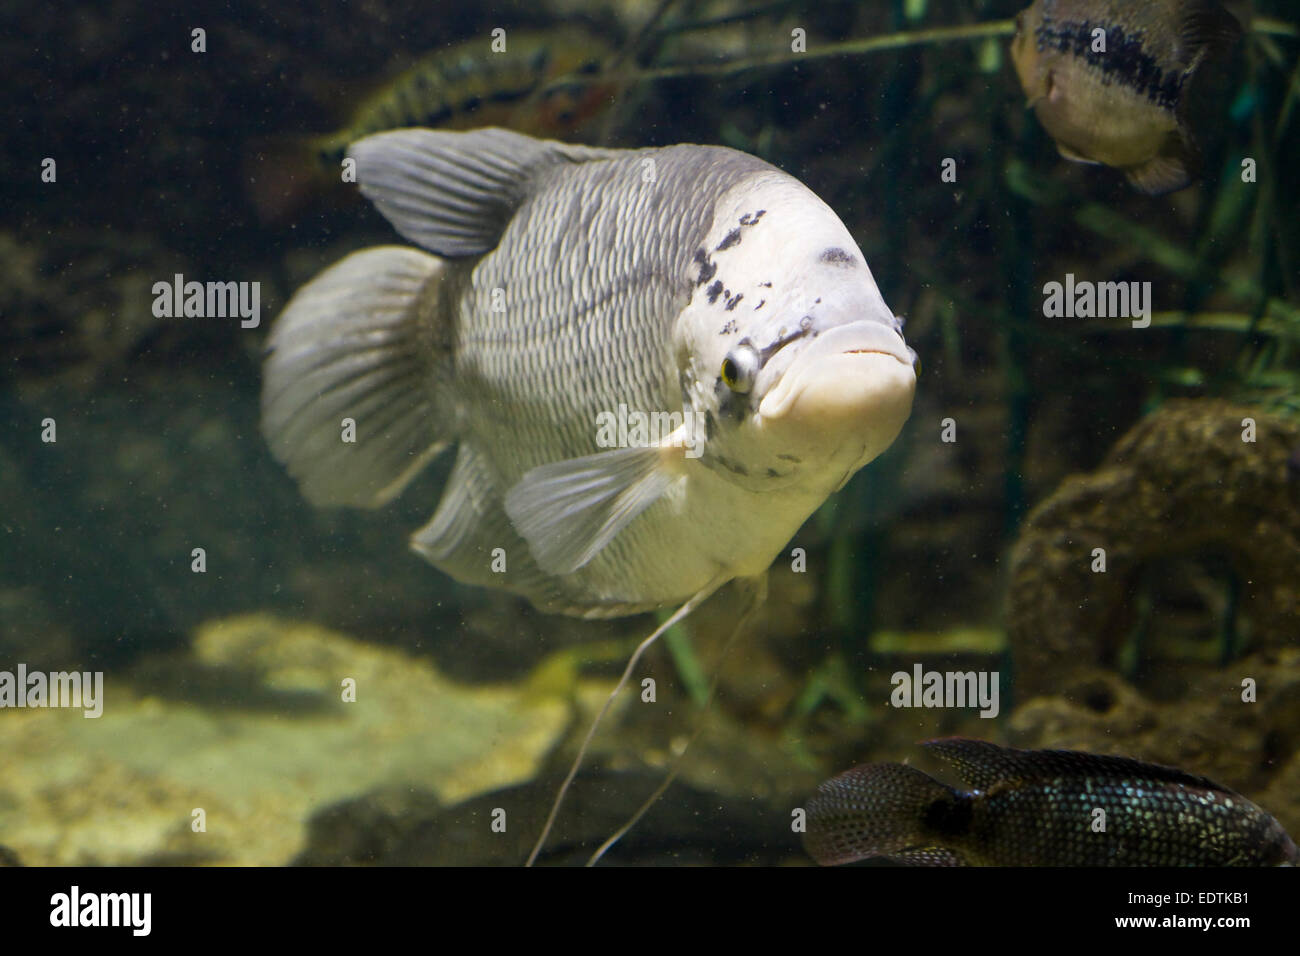 Tropical fish Gourami, latin names Trichogaster, Colisa, Sphaerichthys, lives in Southern-Eastern Asia. Stock Photo